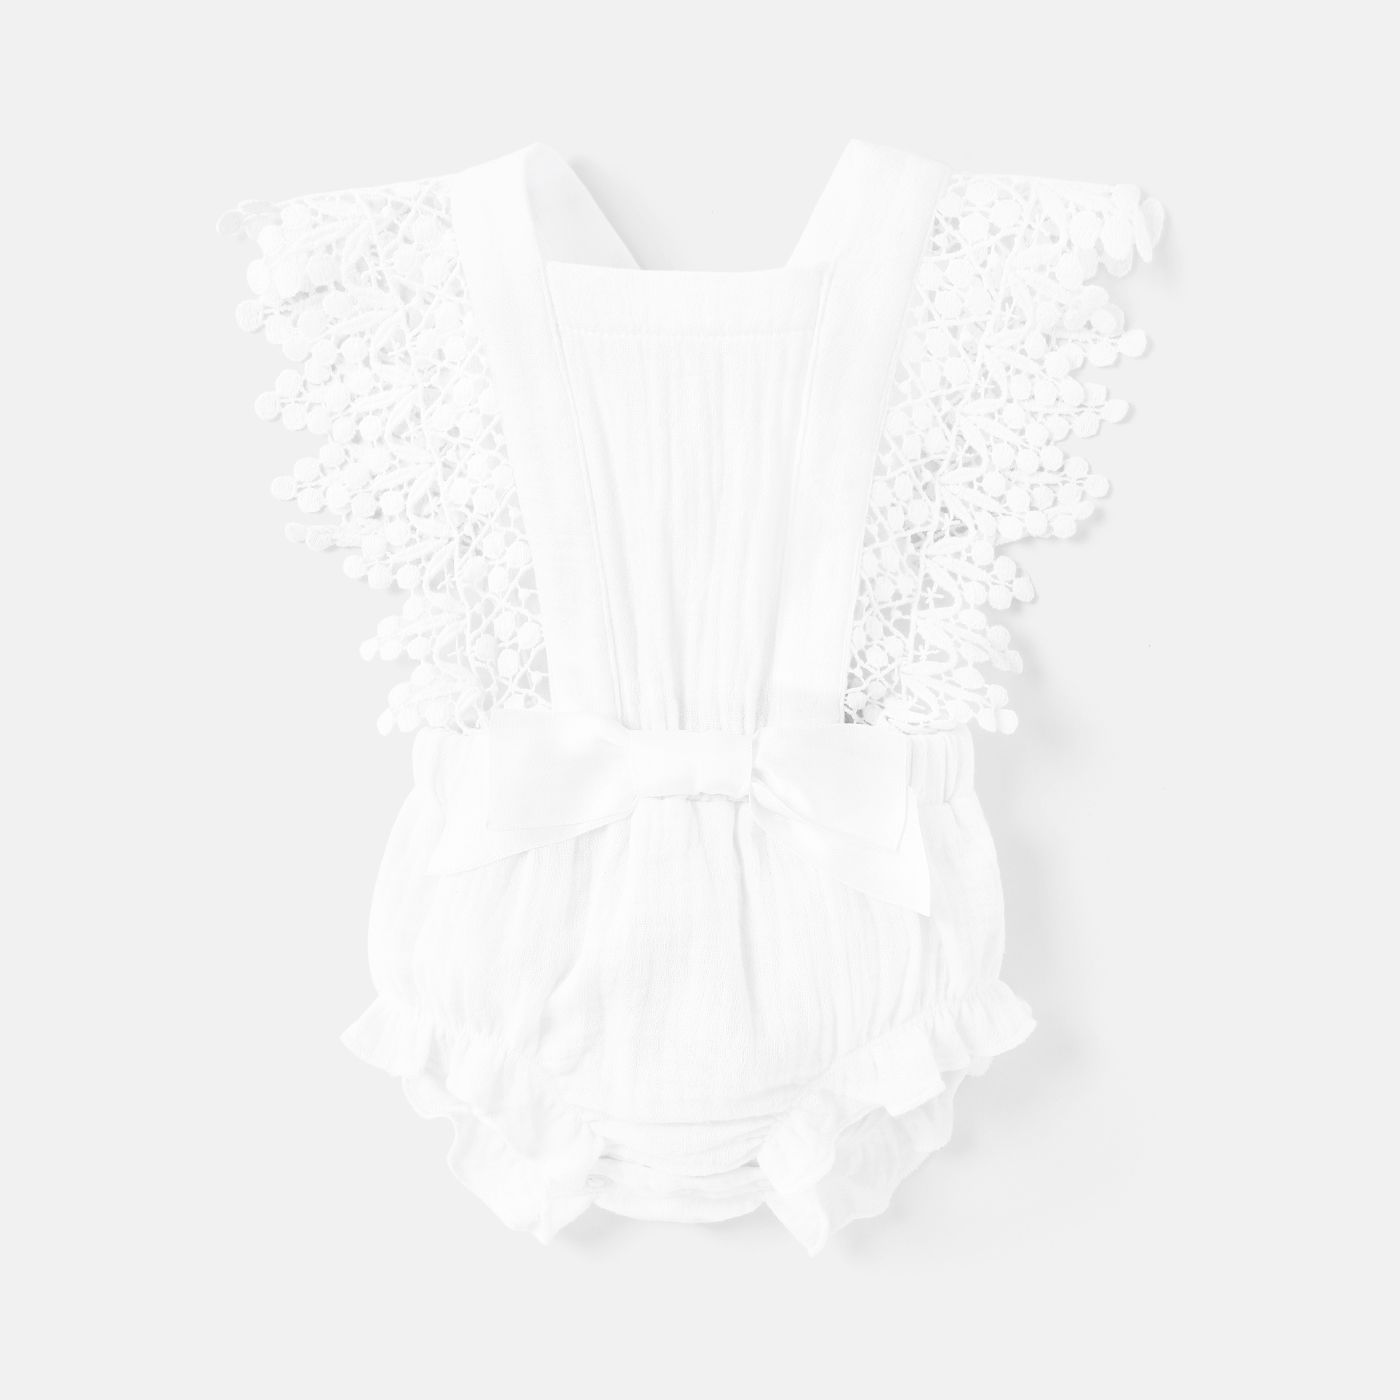 Baby Girl 100% Cotton Crepe Lace Design Bow Front Ruffle Trim Romper